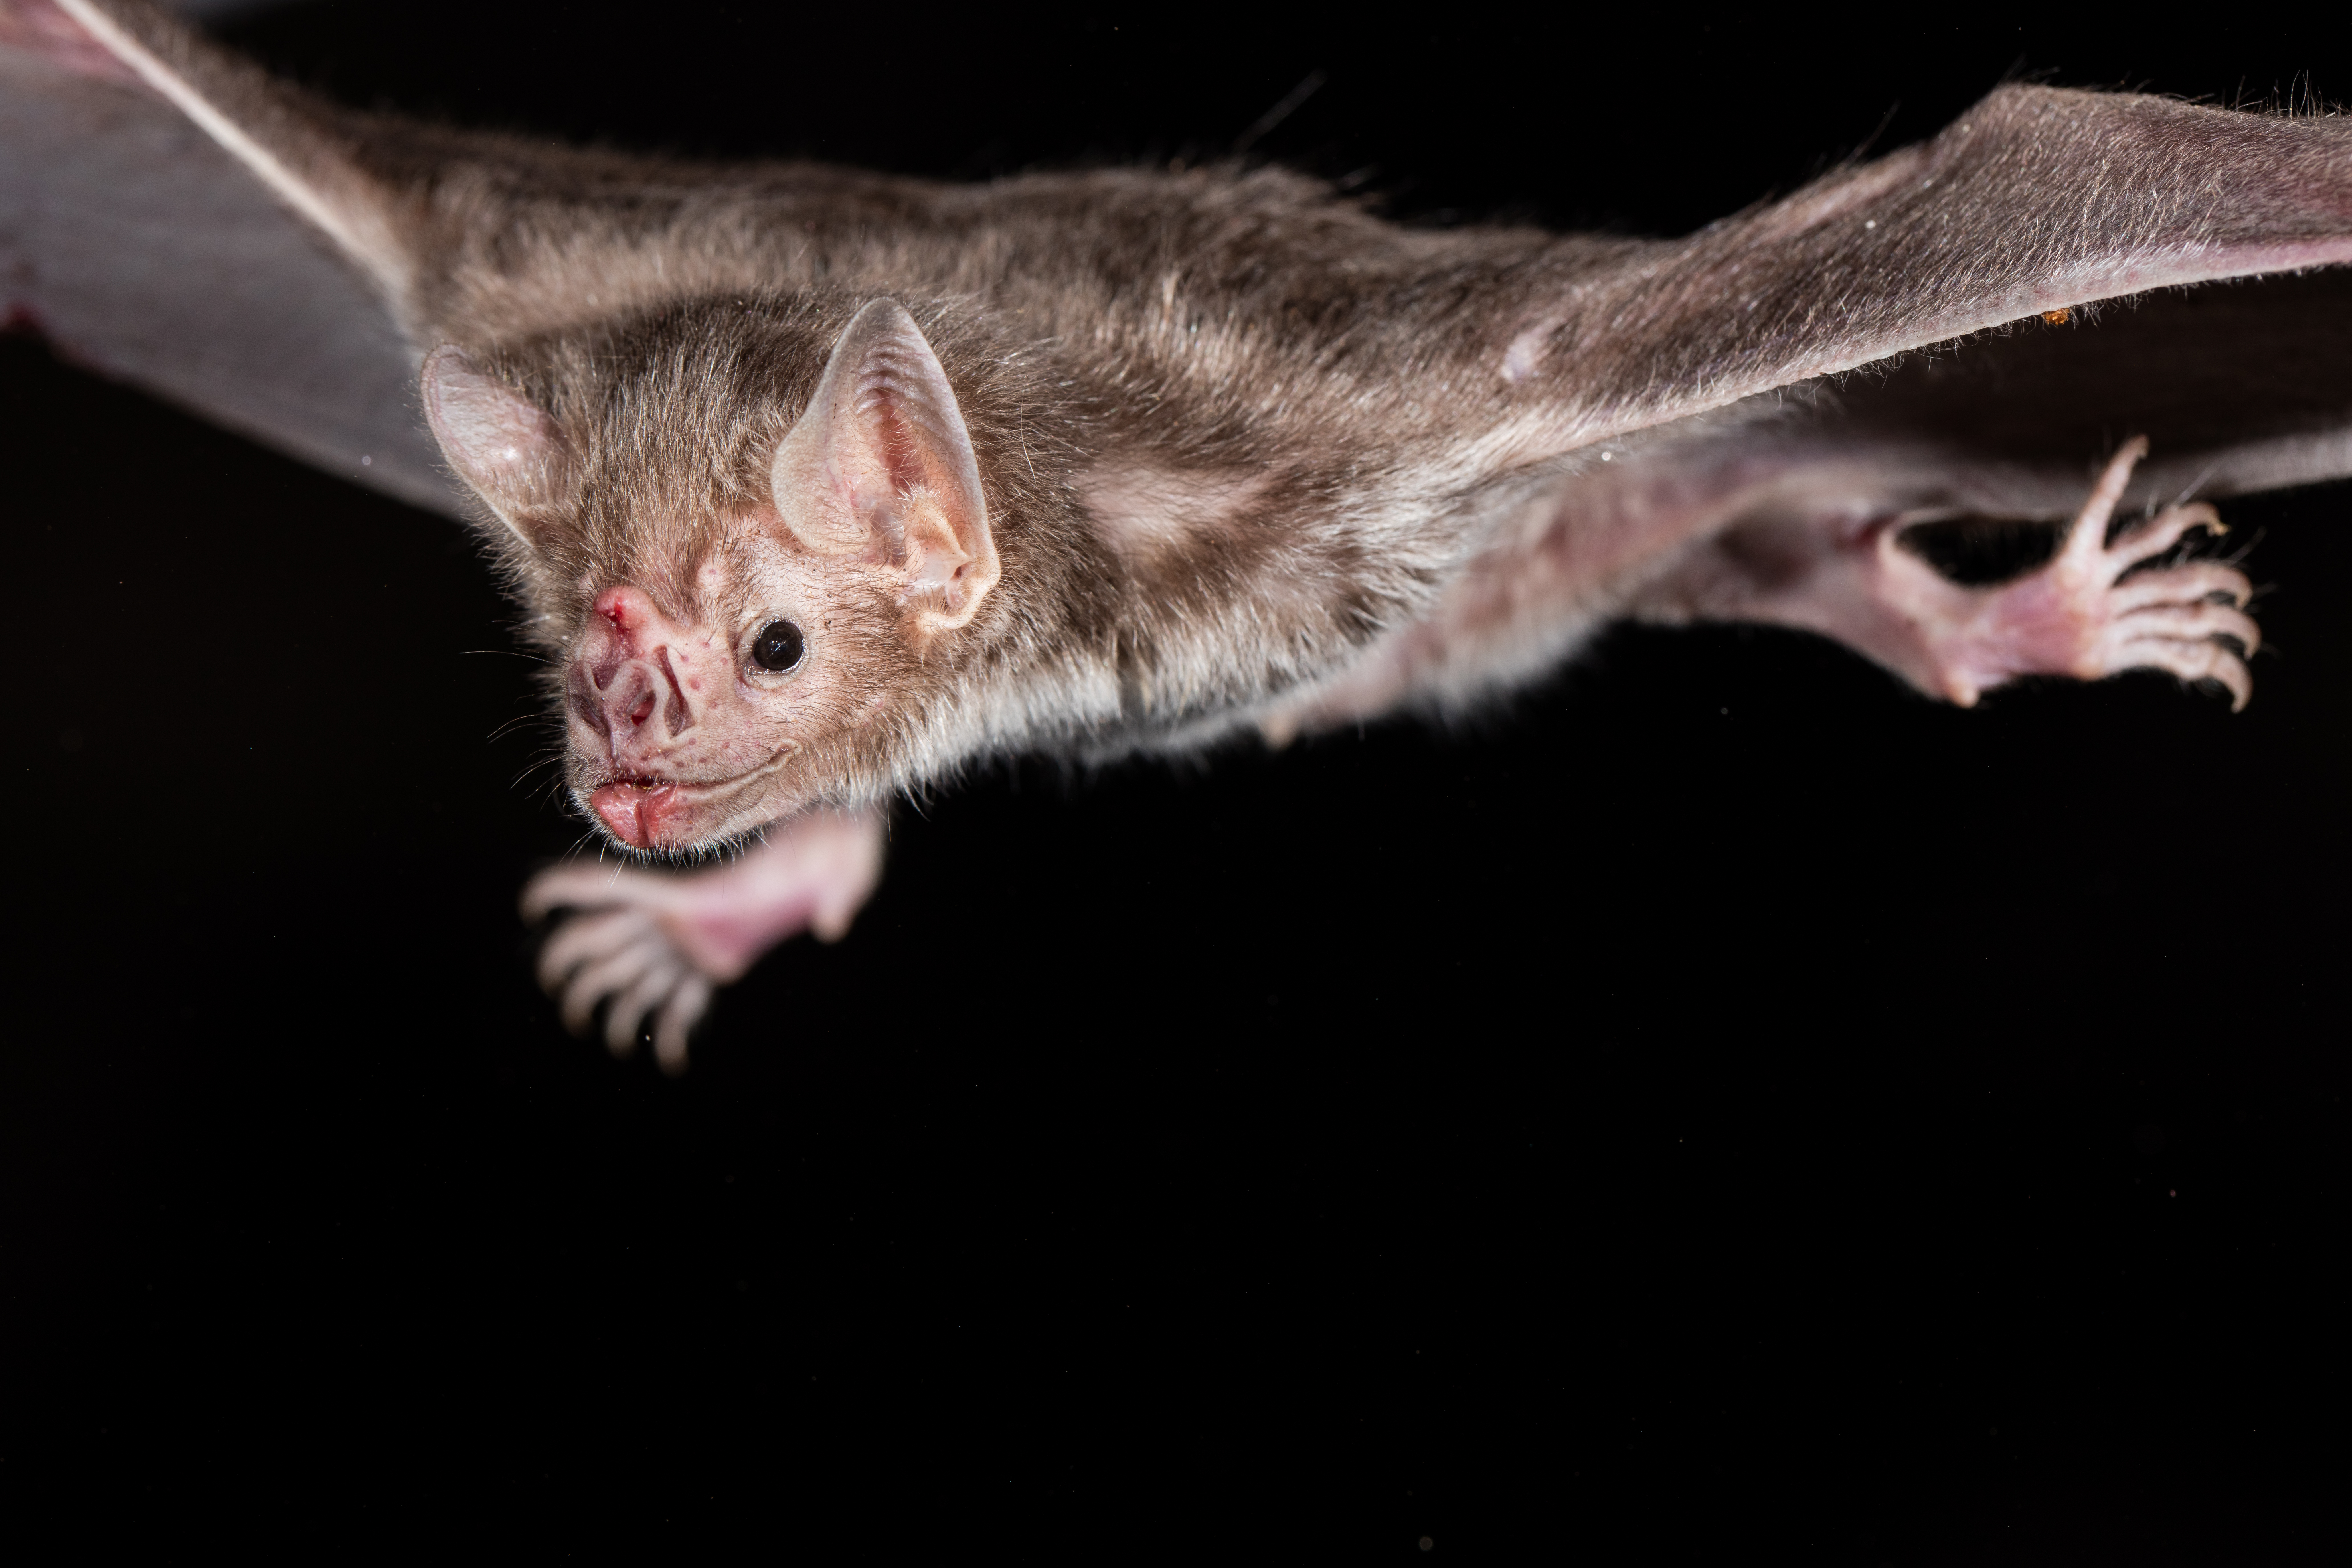 Gene losses allow vampire bats to live solely on a diet of blood